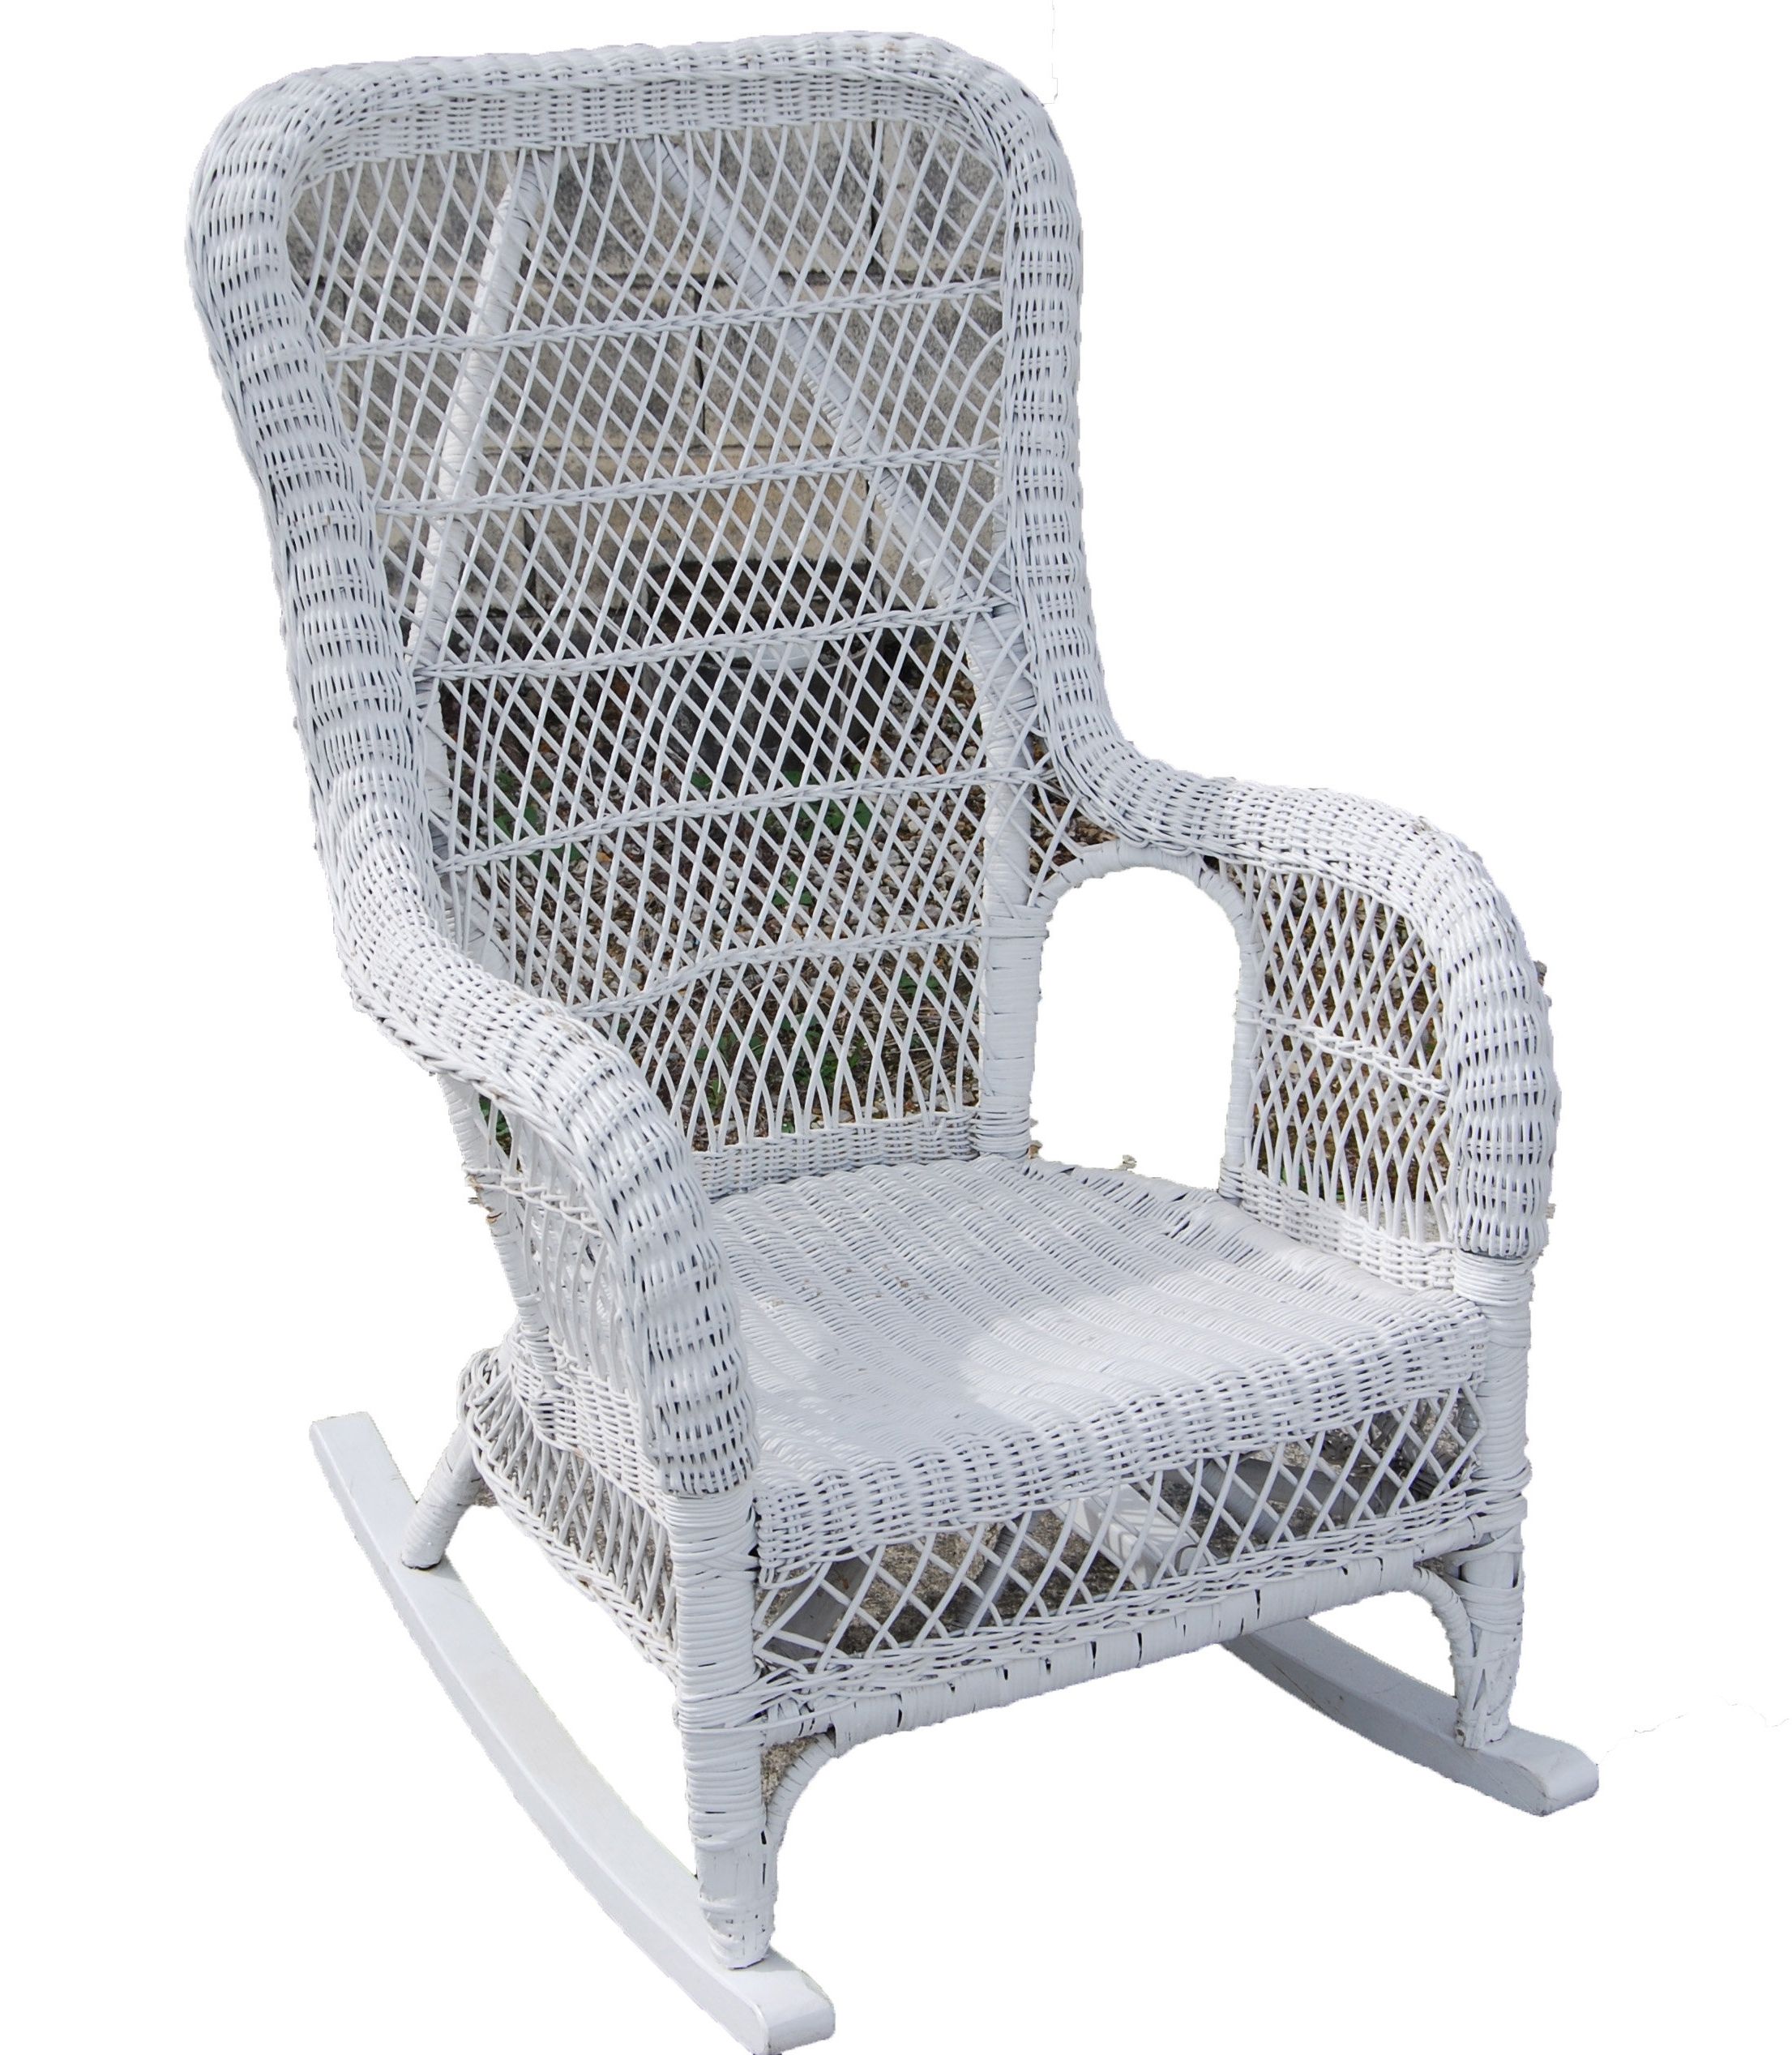 Preferred Wicker Rocking Chairs For Porch Arm Chair Wicker & Loom Round Back Intended For Wicker Rocking Chair With Magazine Holder (Photo 13 of 15)